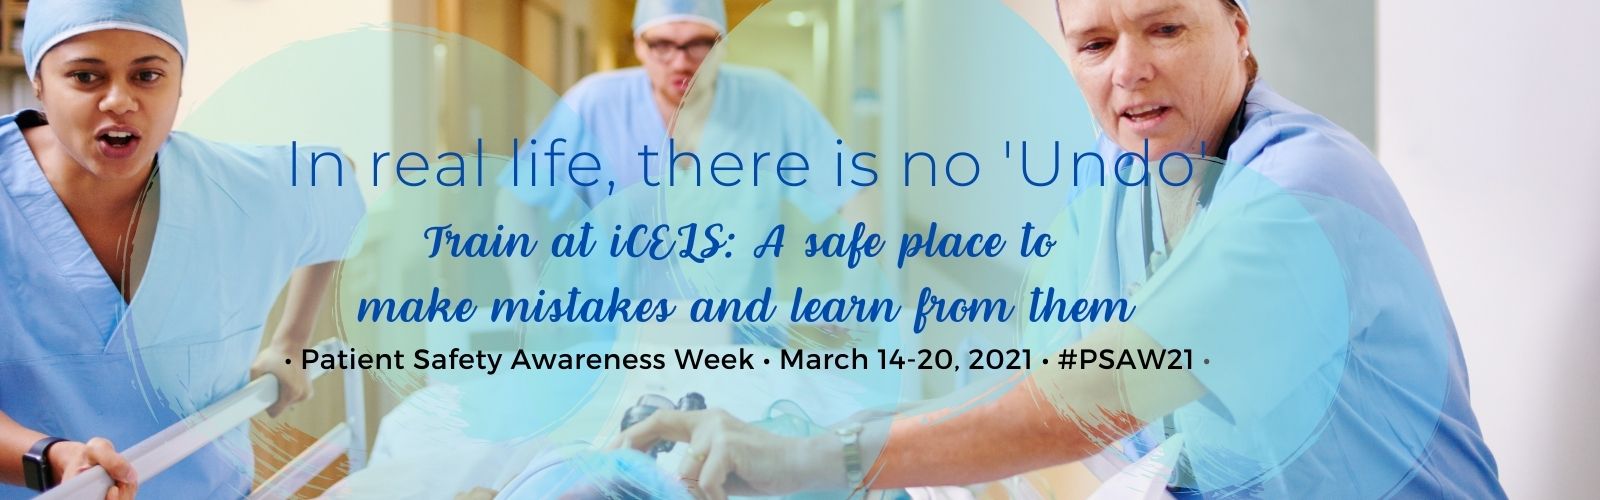 iCELS-Patient-Safety-Awareness-Week-2021.jpg